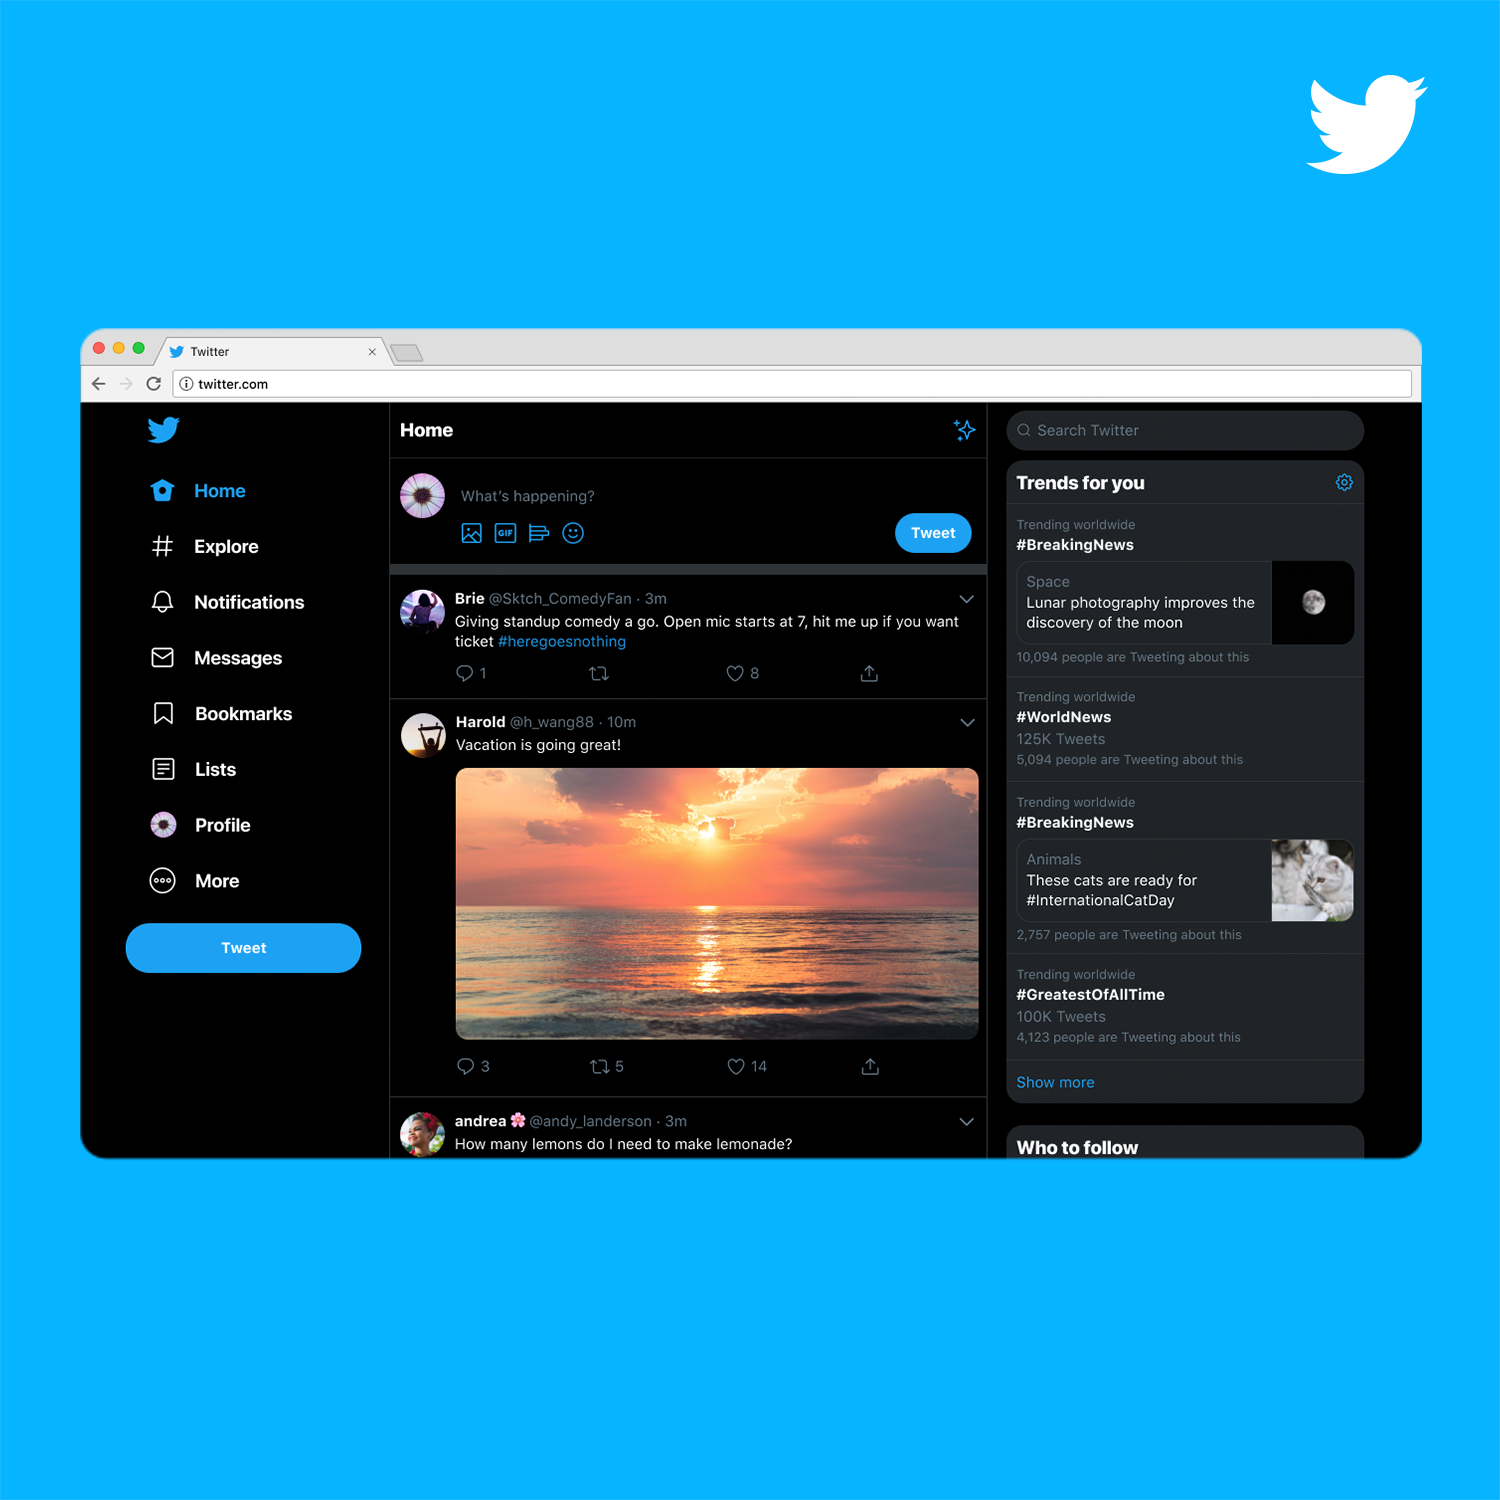 Building the new Twitter.com